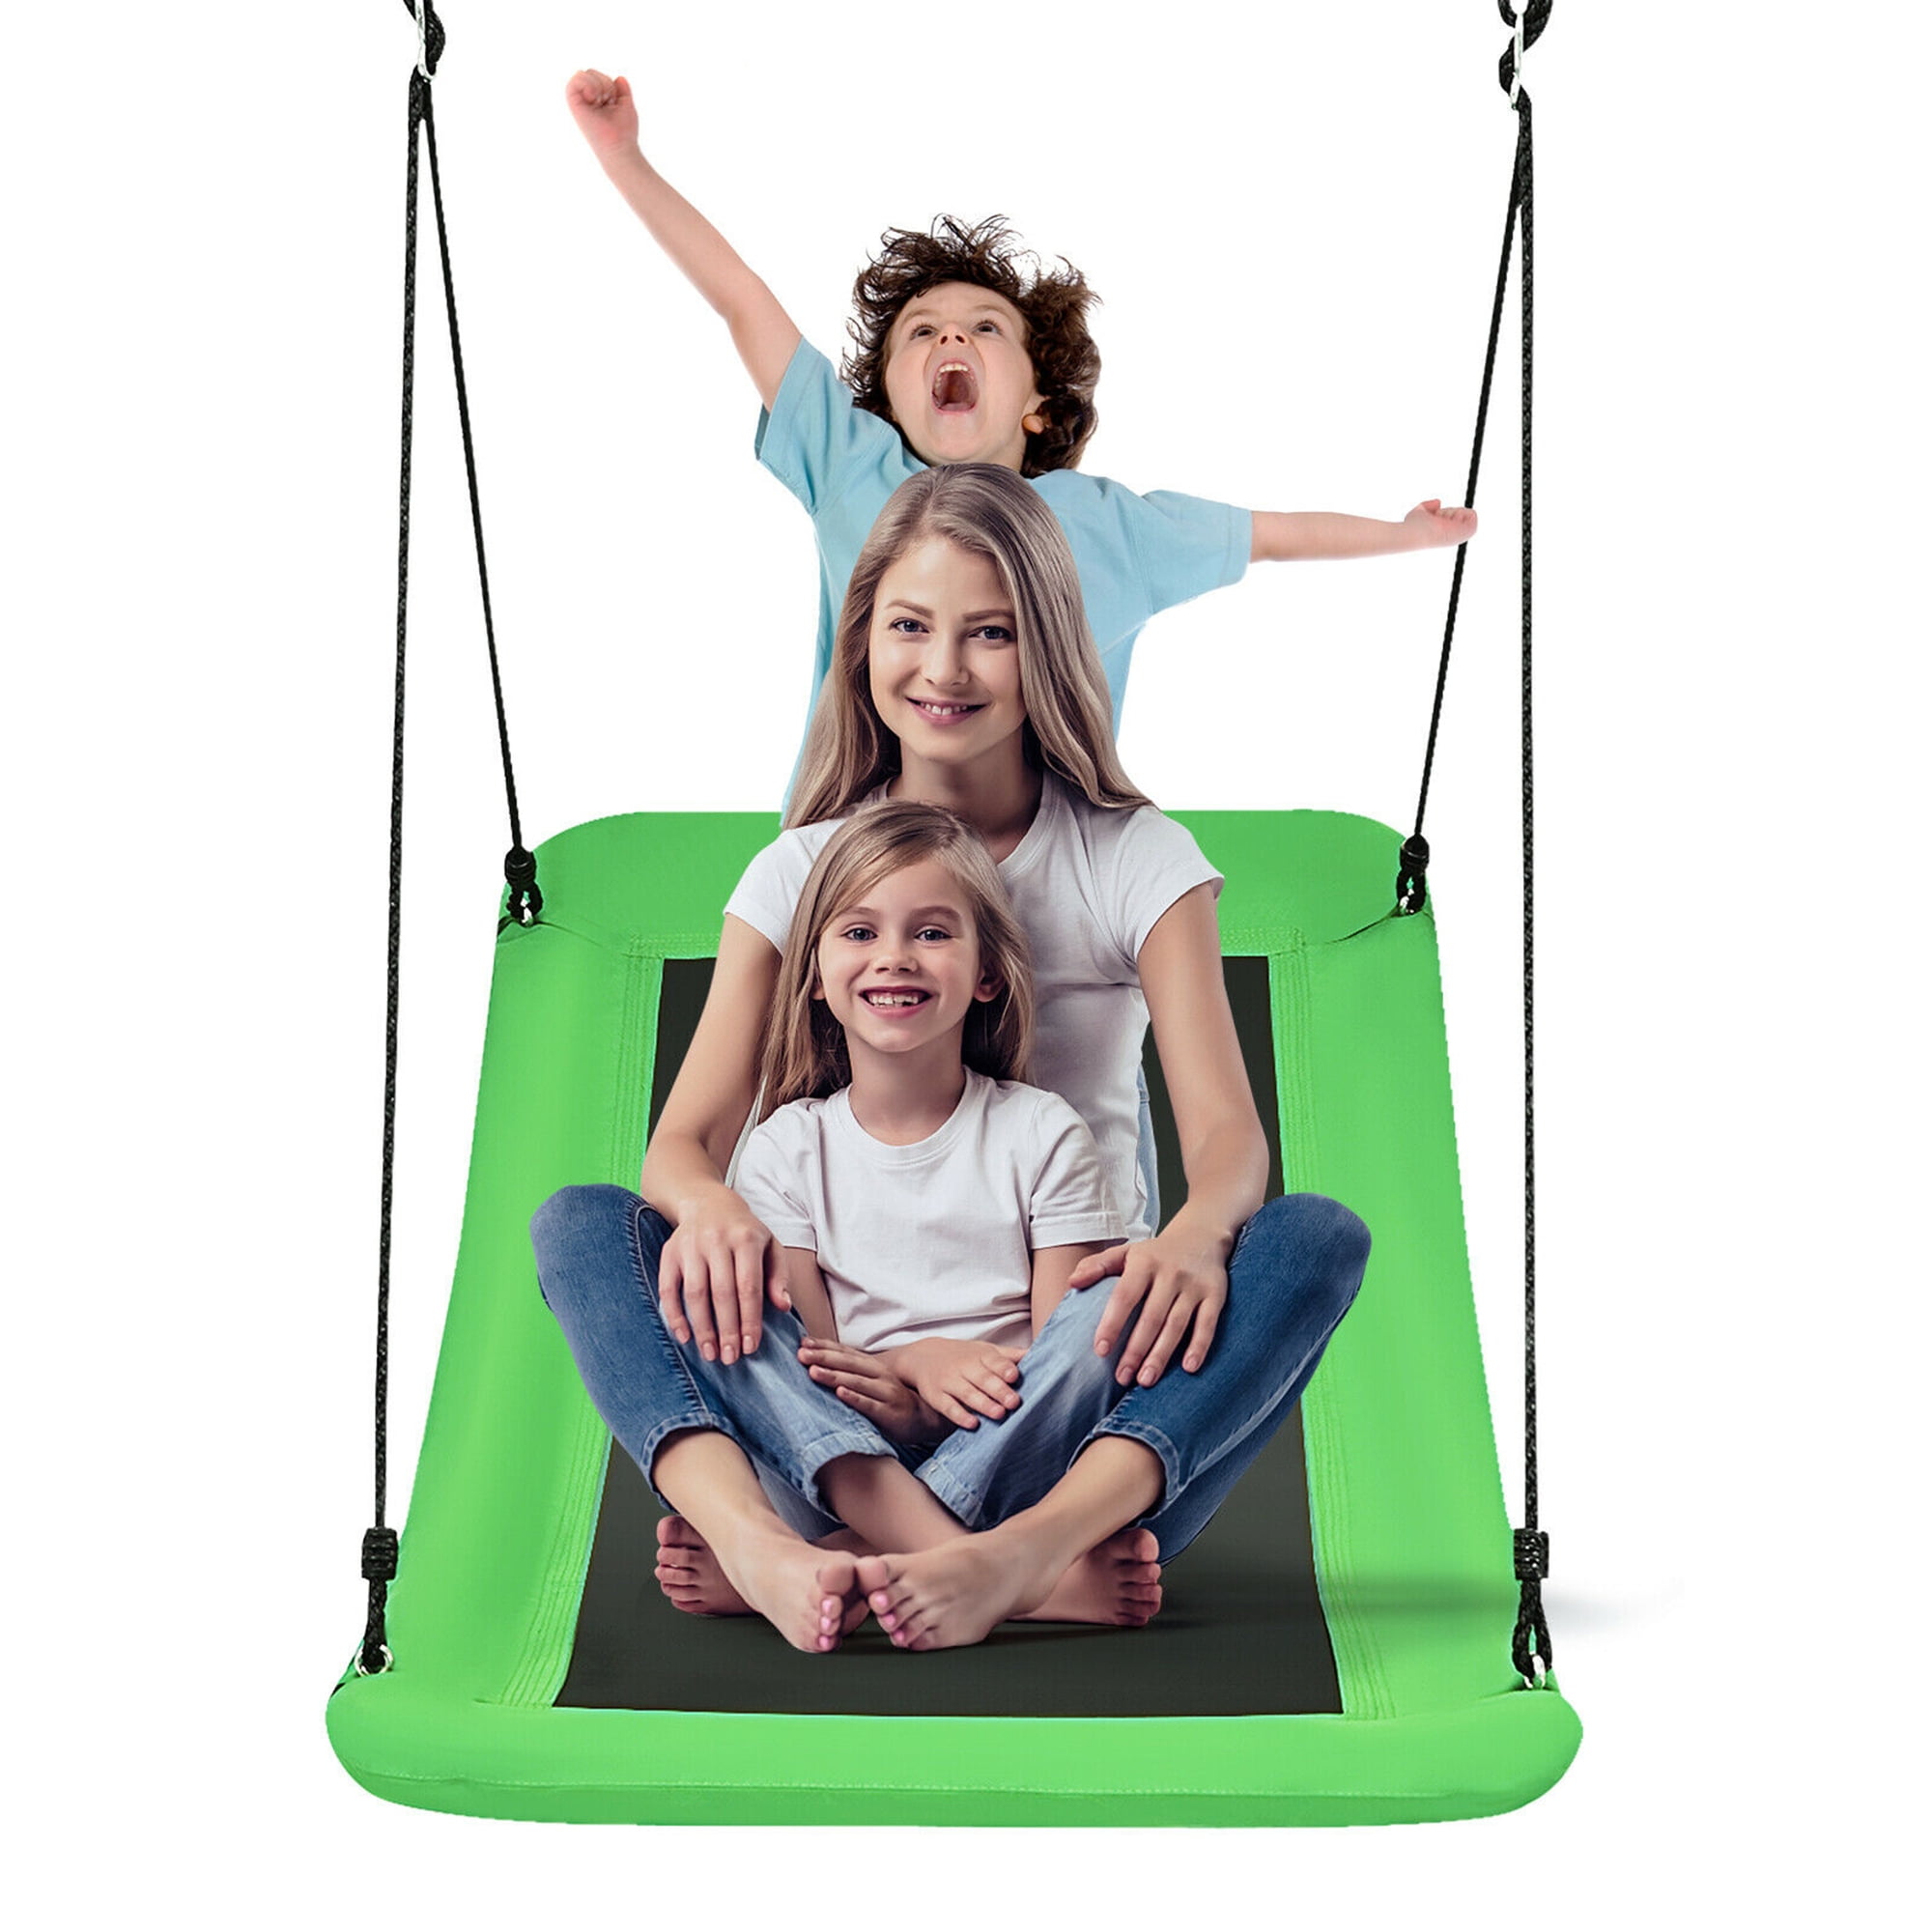 Gymax 700lb Giant 60'' Platform Tree Swing for Kids and Adults